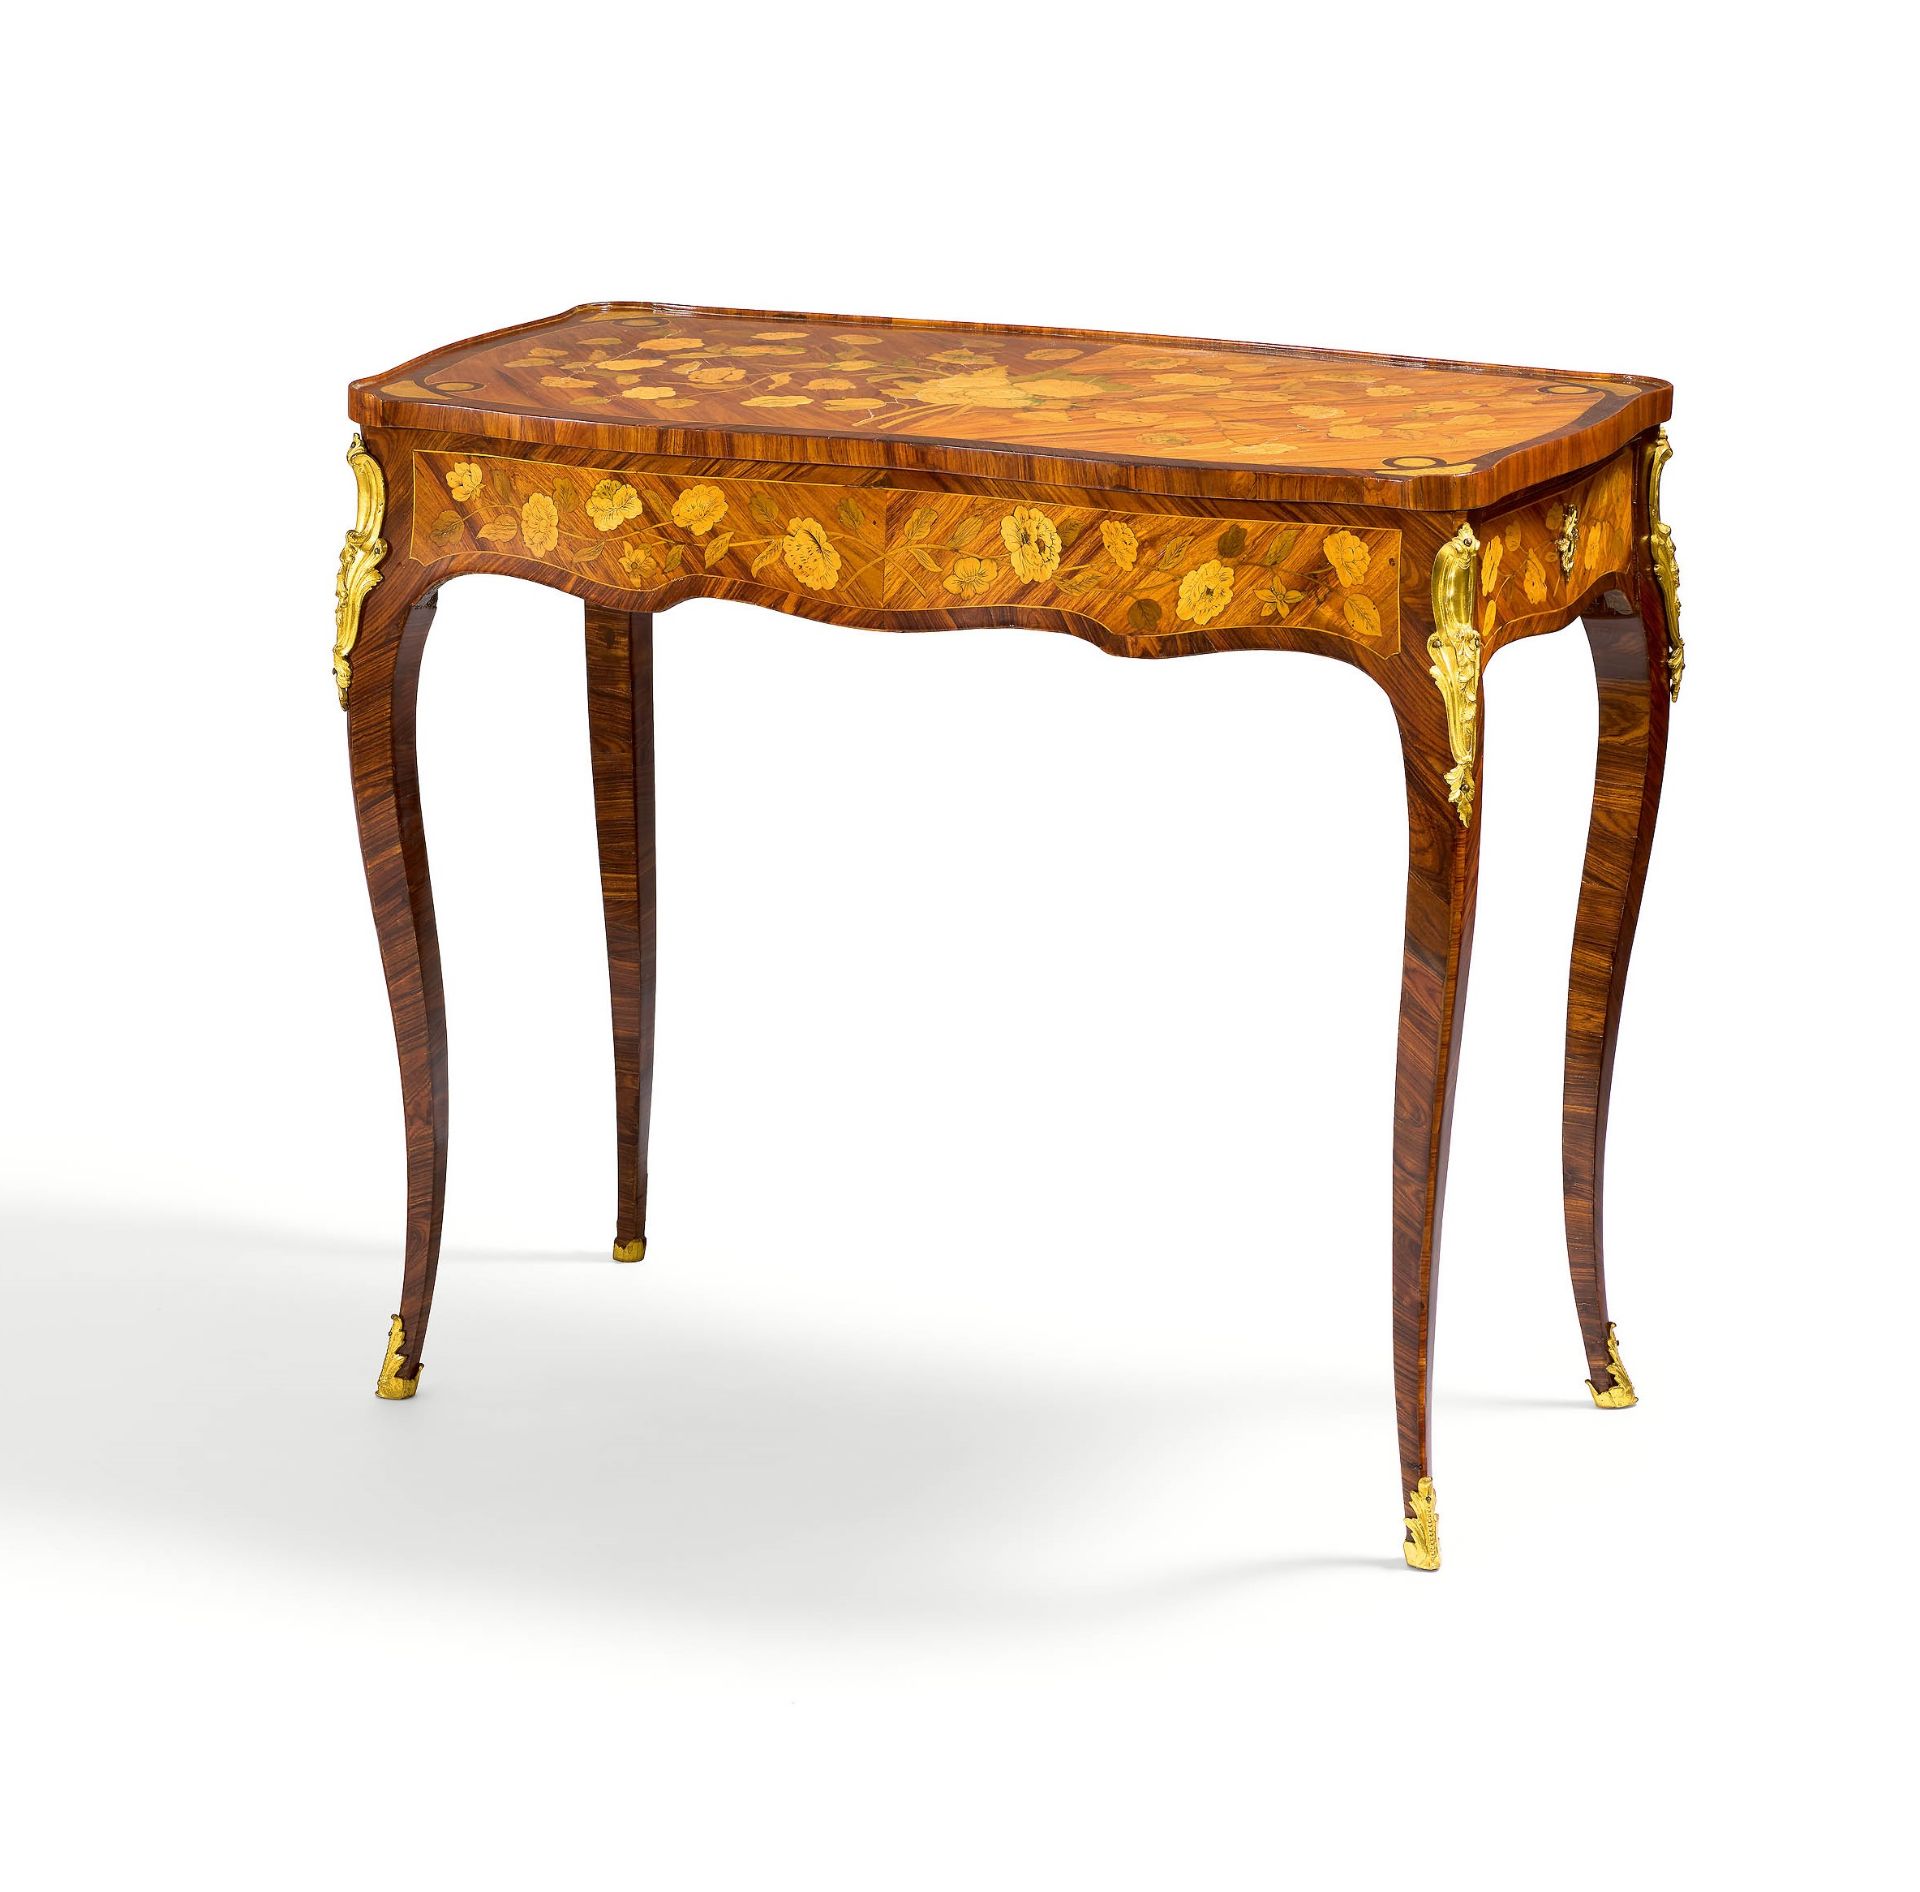 A lady's bureau with floral marquetry Louis XV